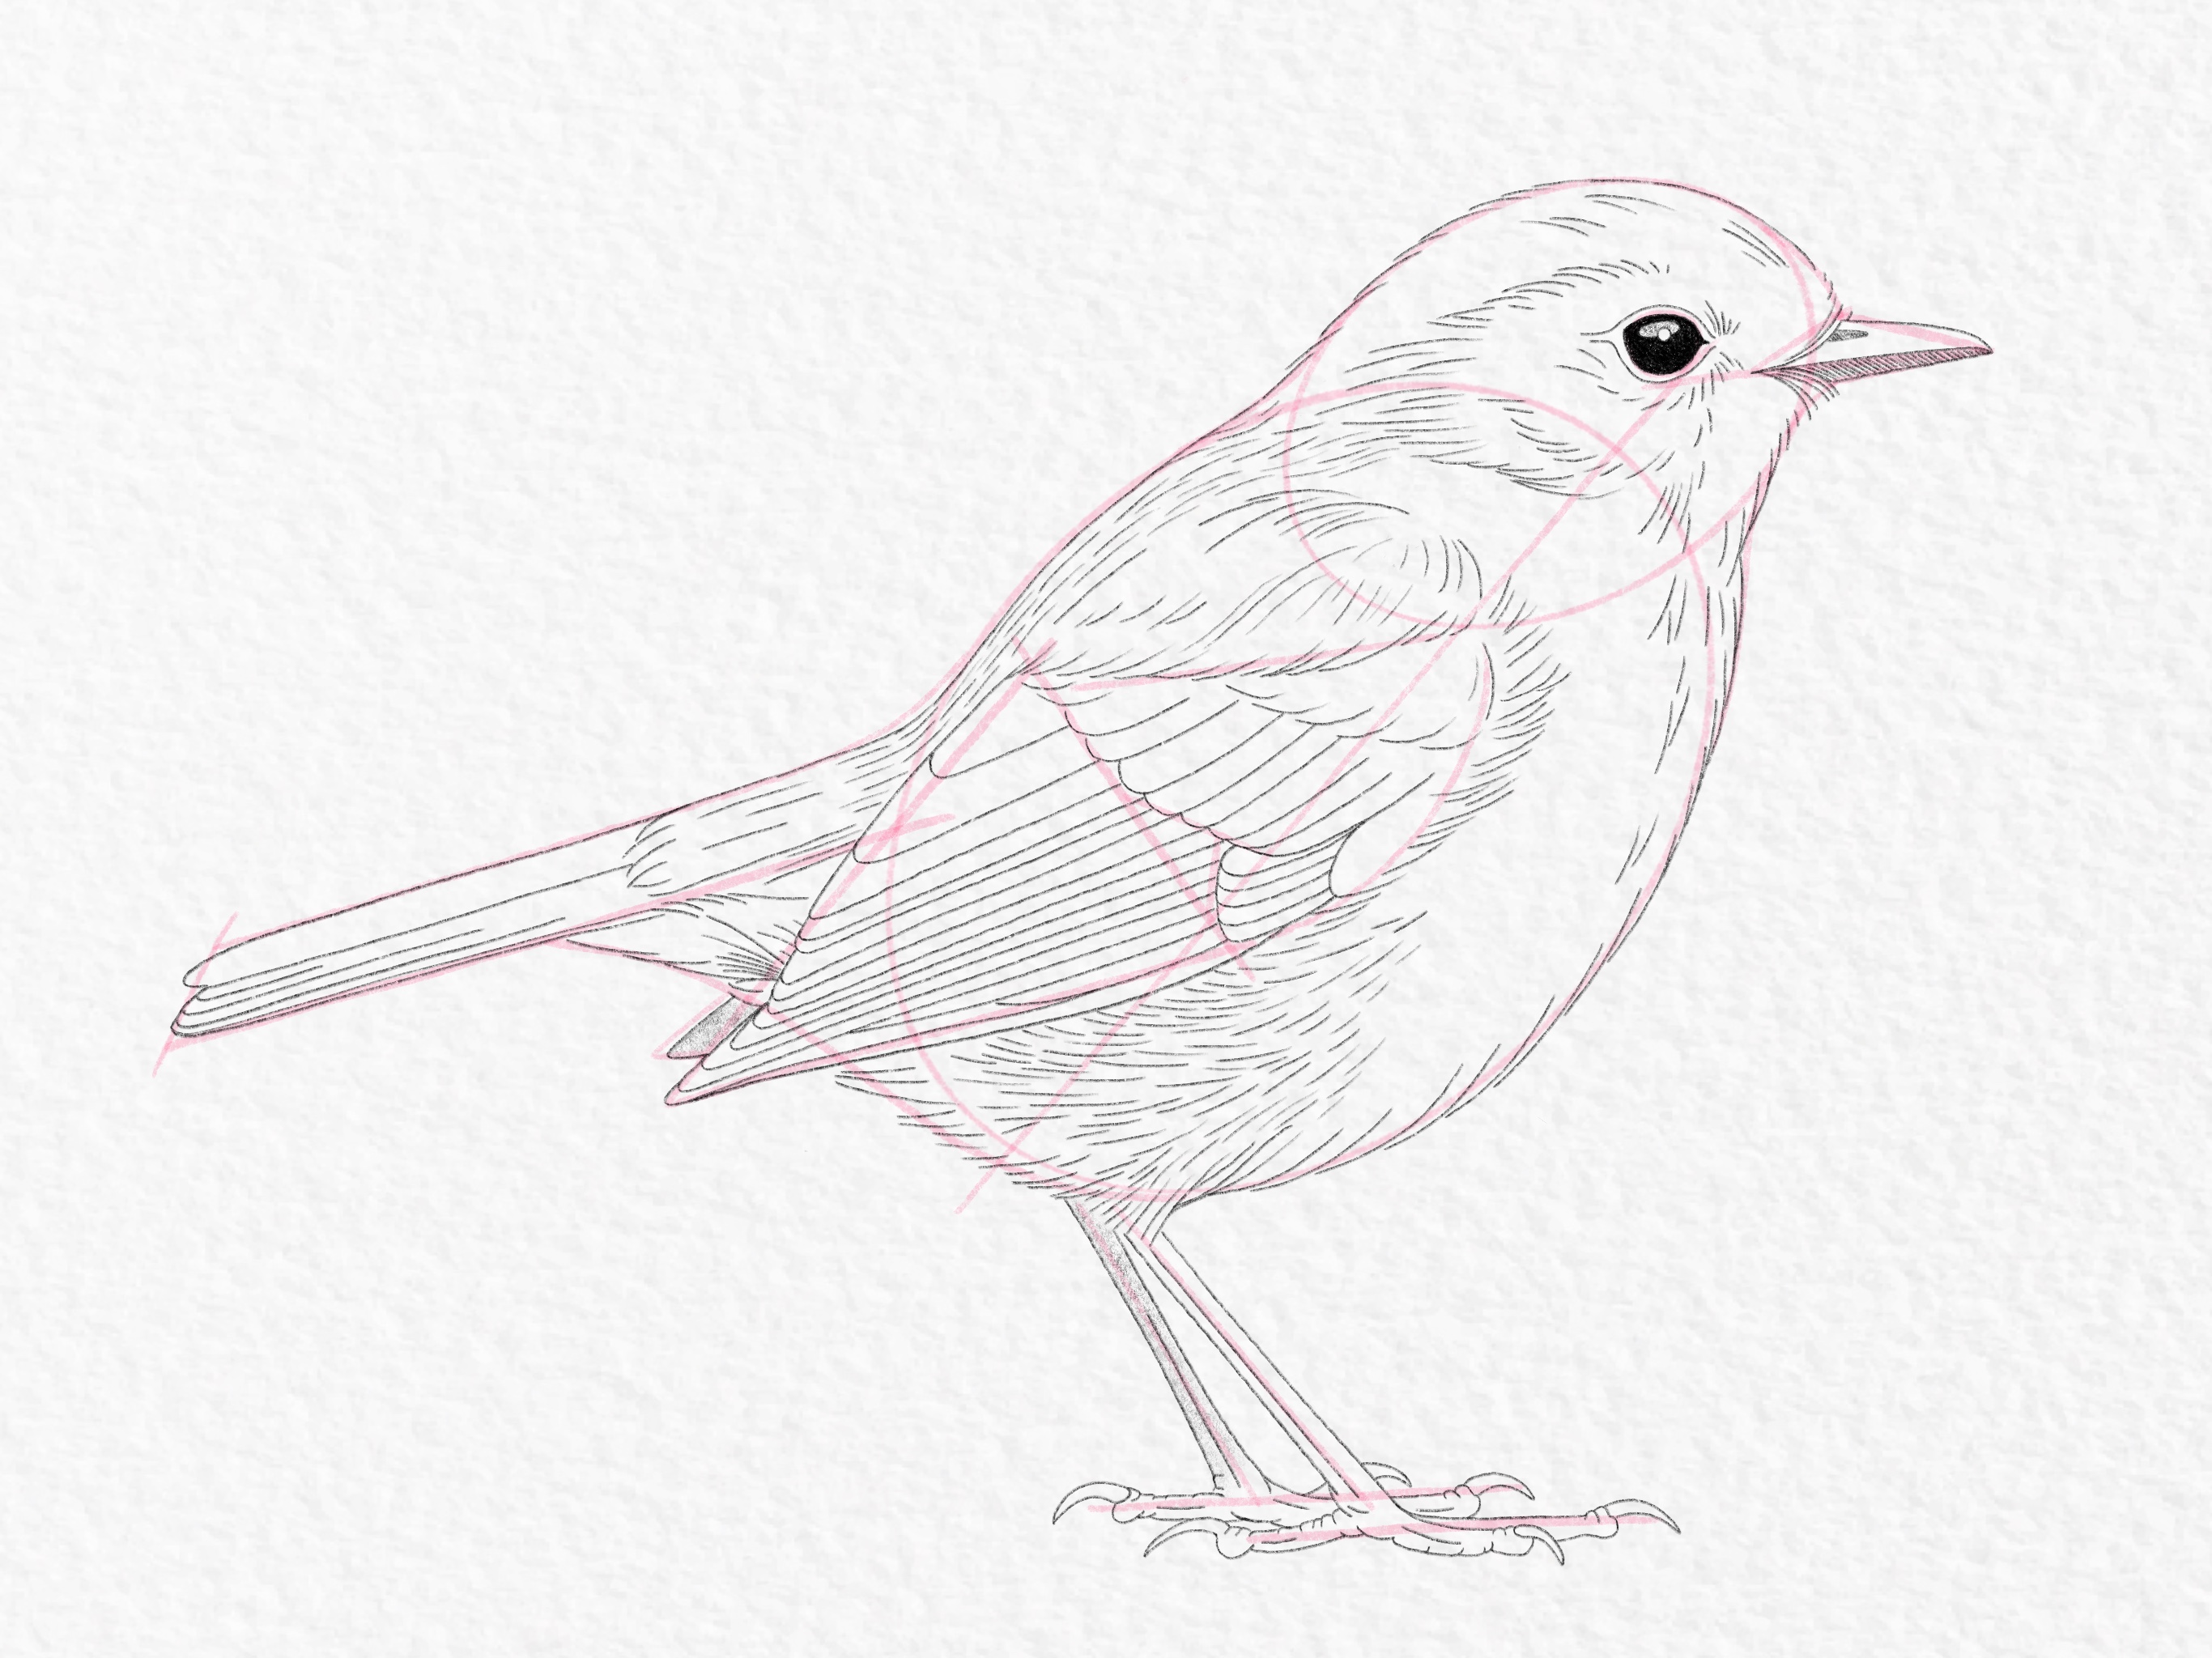 How to draw a bird - Step 19